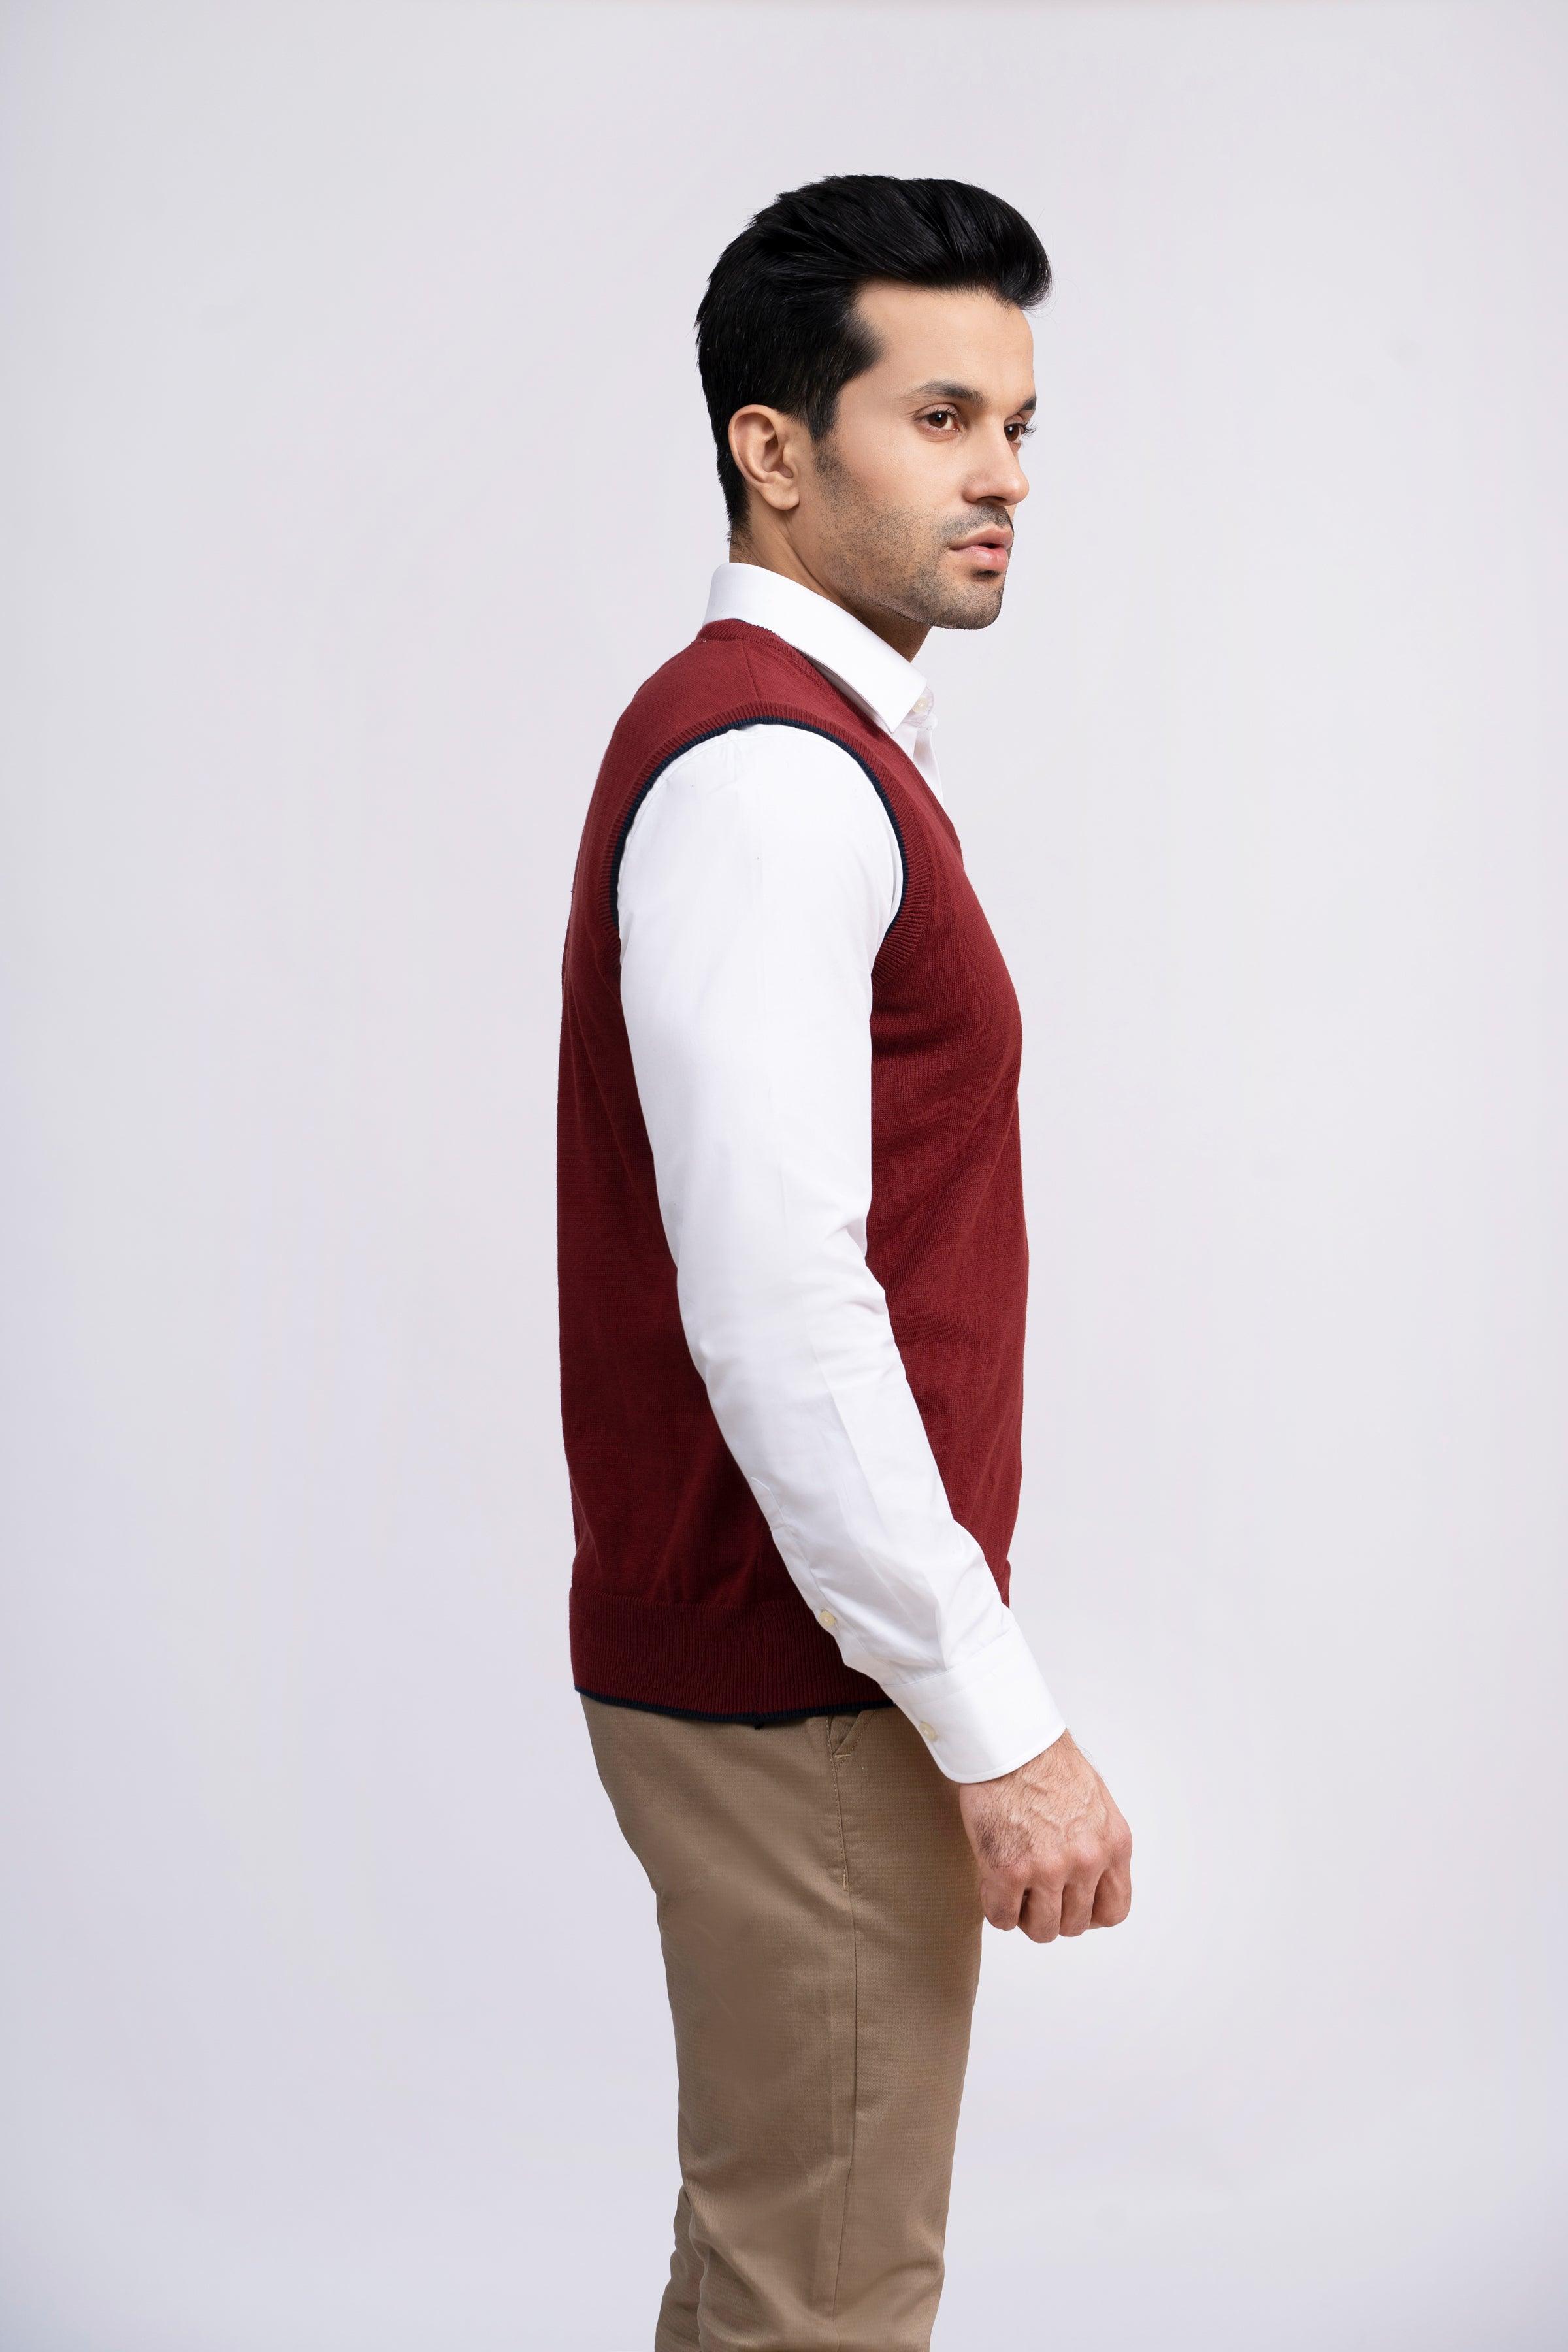 SWEATER V NECK S/L MAROON at Charcoal Clothing